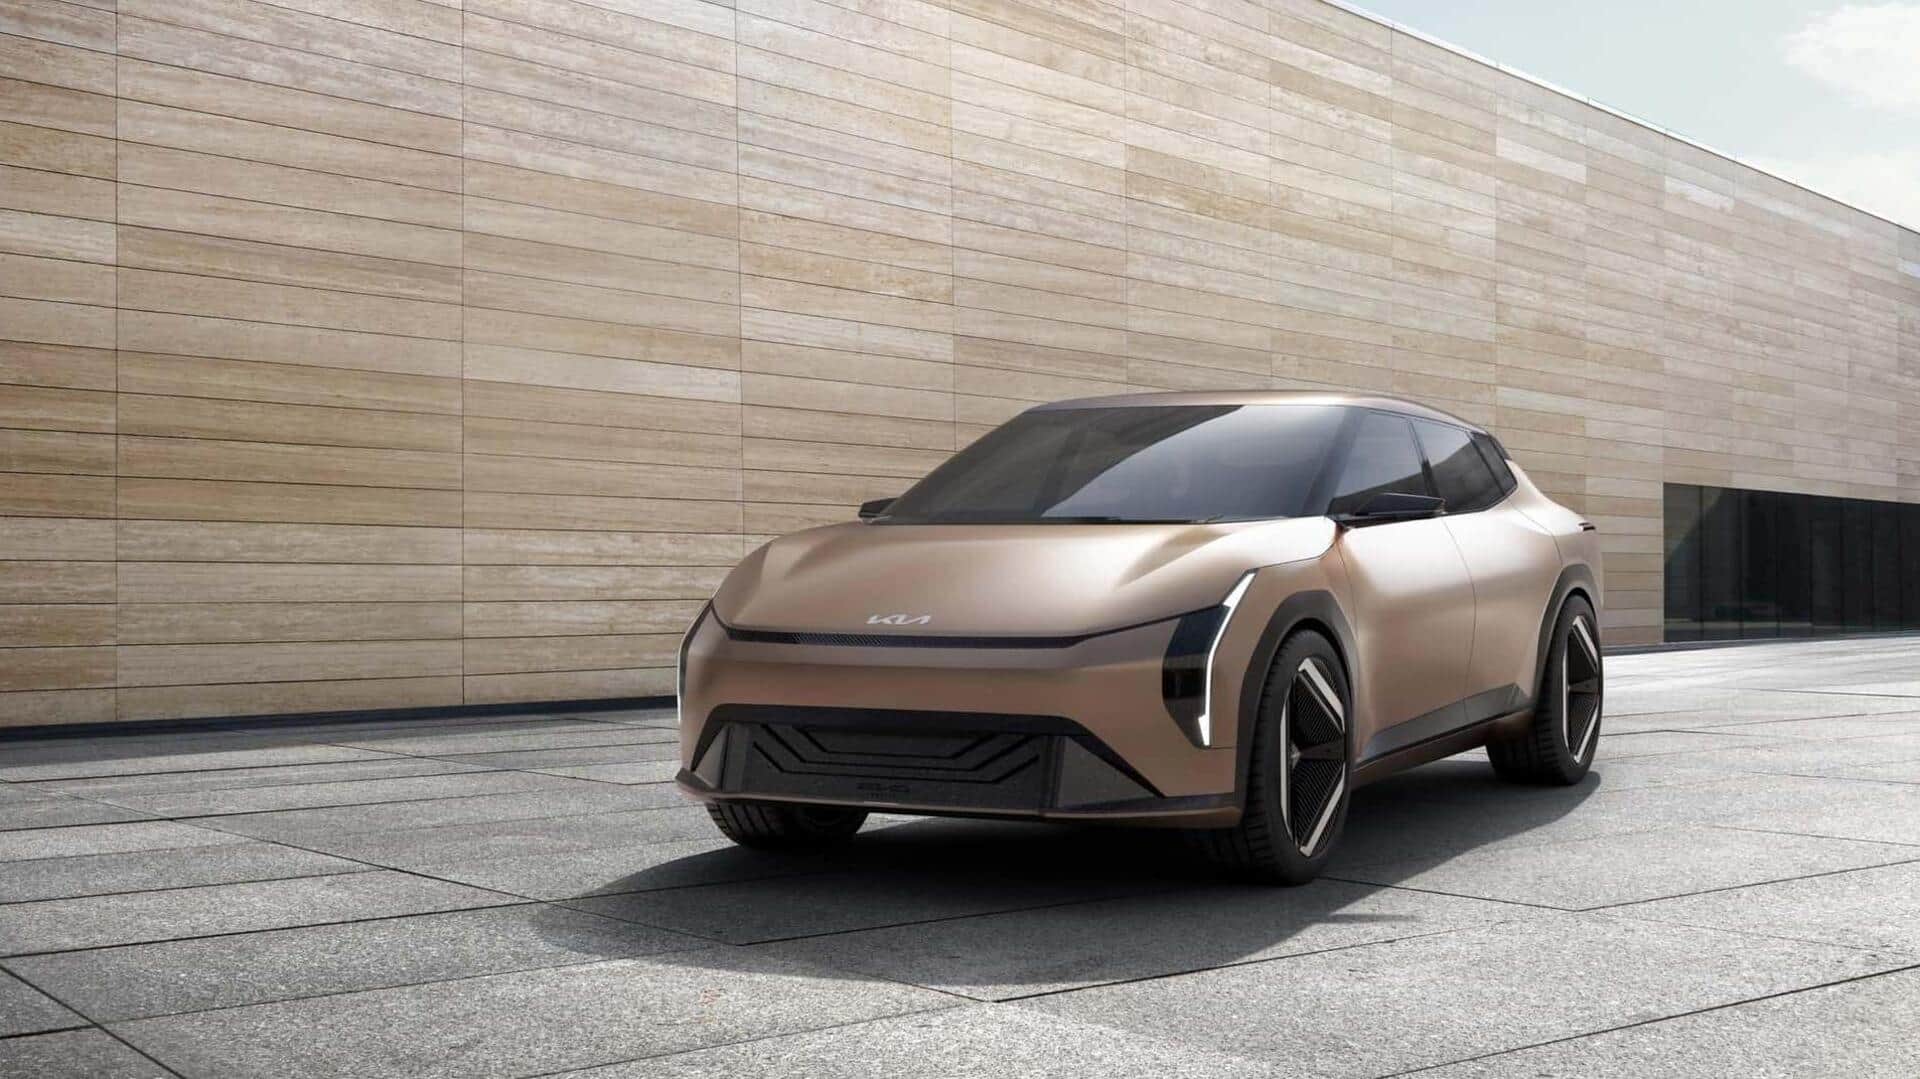 Kia EV4 arrives with edgy design, will head to production